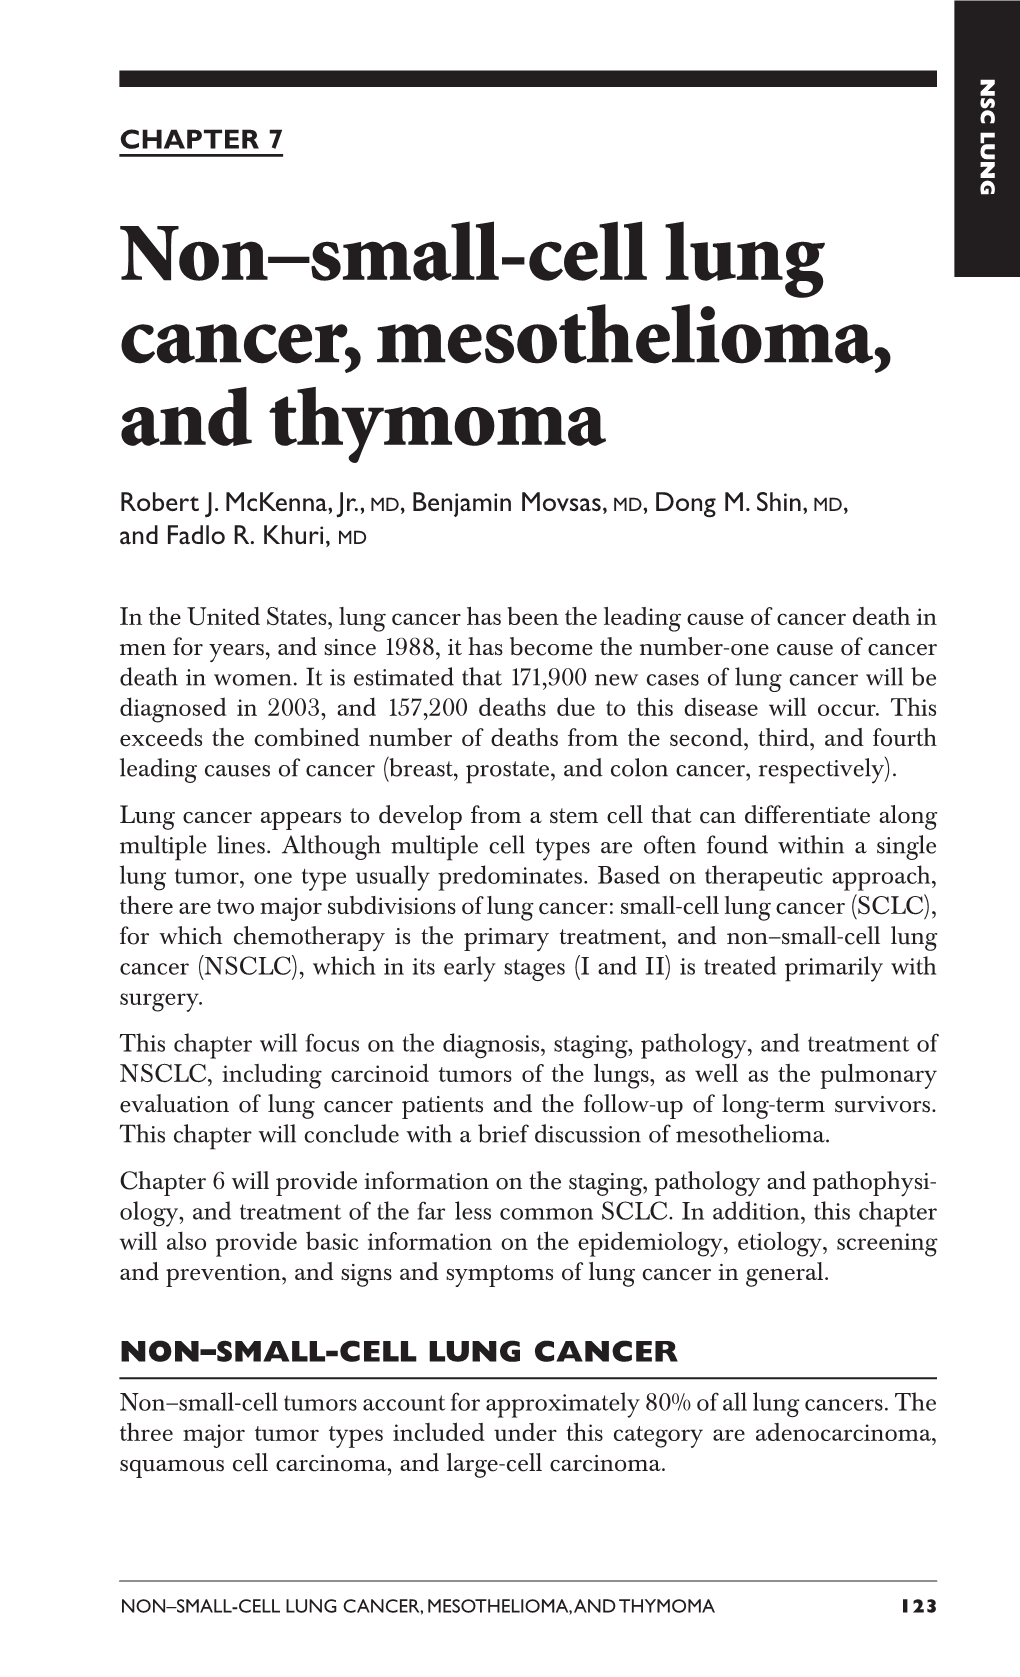 Non–Small-Cell Lung Cancer, Mesothelioma, and Thymoma